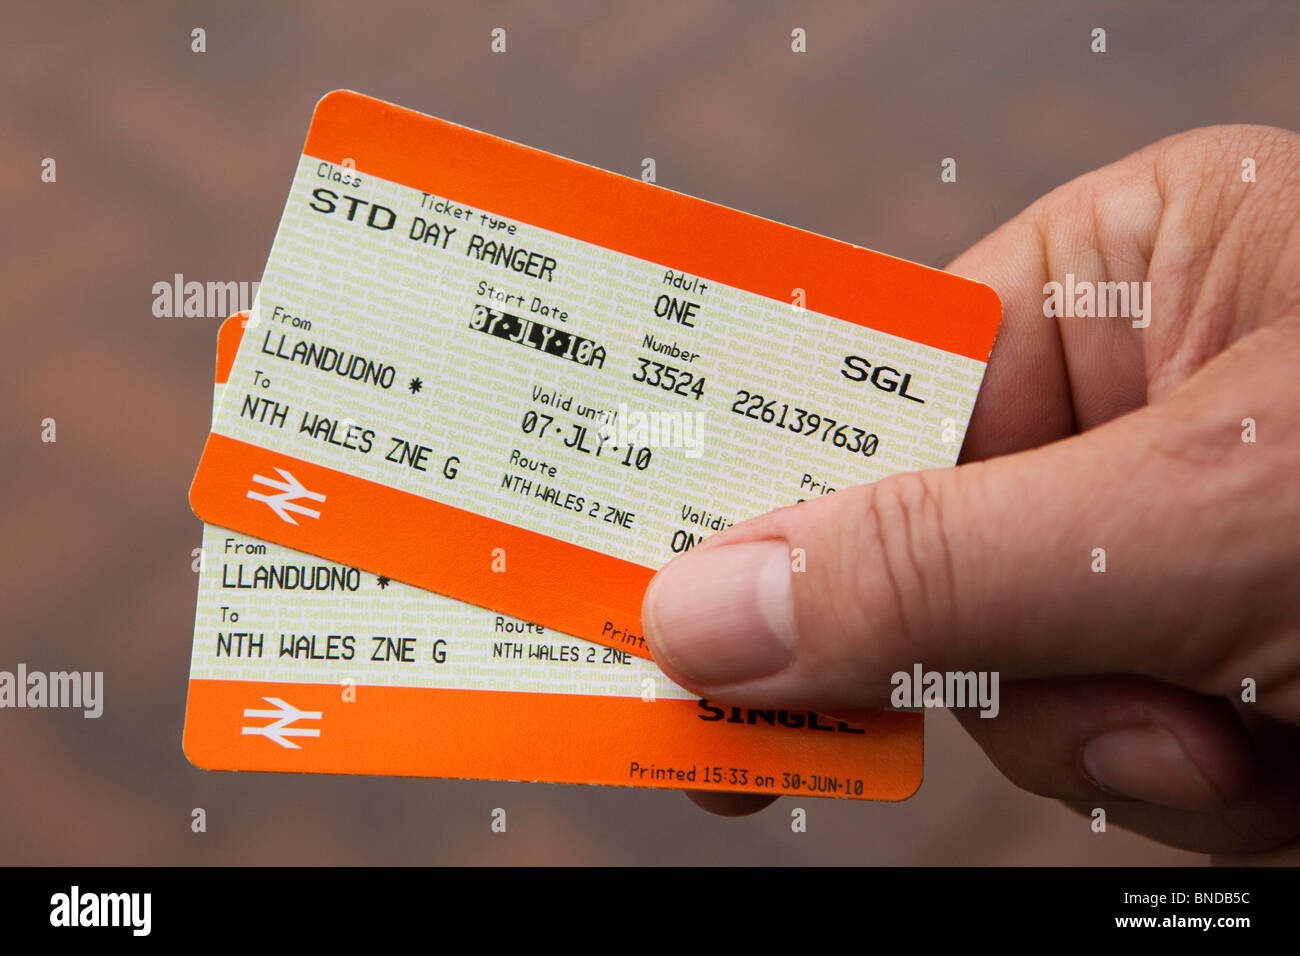 UK, Wales, Snowdonia, Integrated Transport, North Wales Rover, bus, train, all day tickets Stock Photo